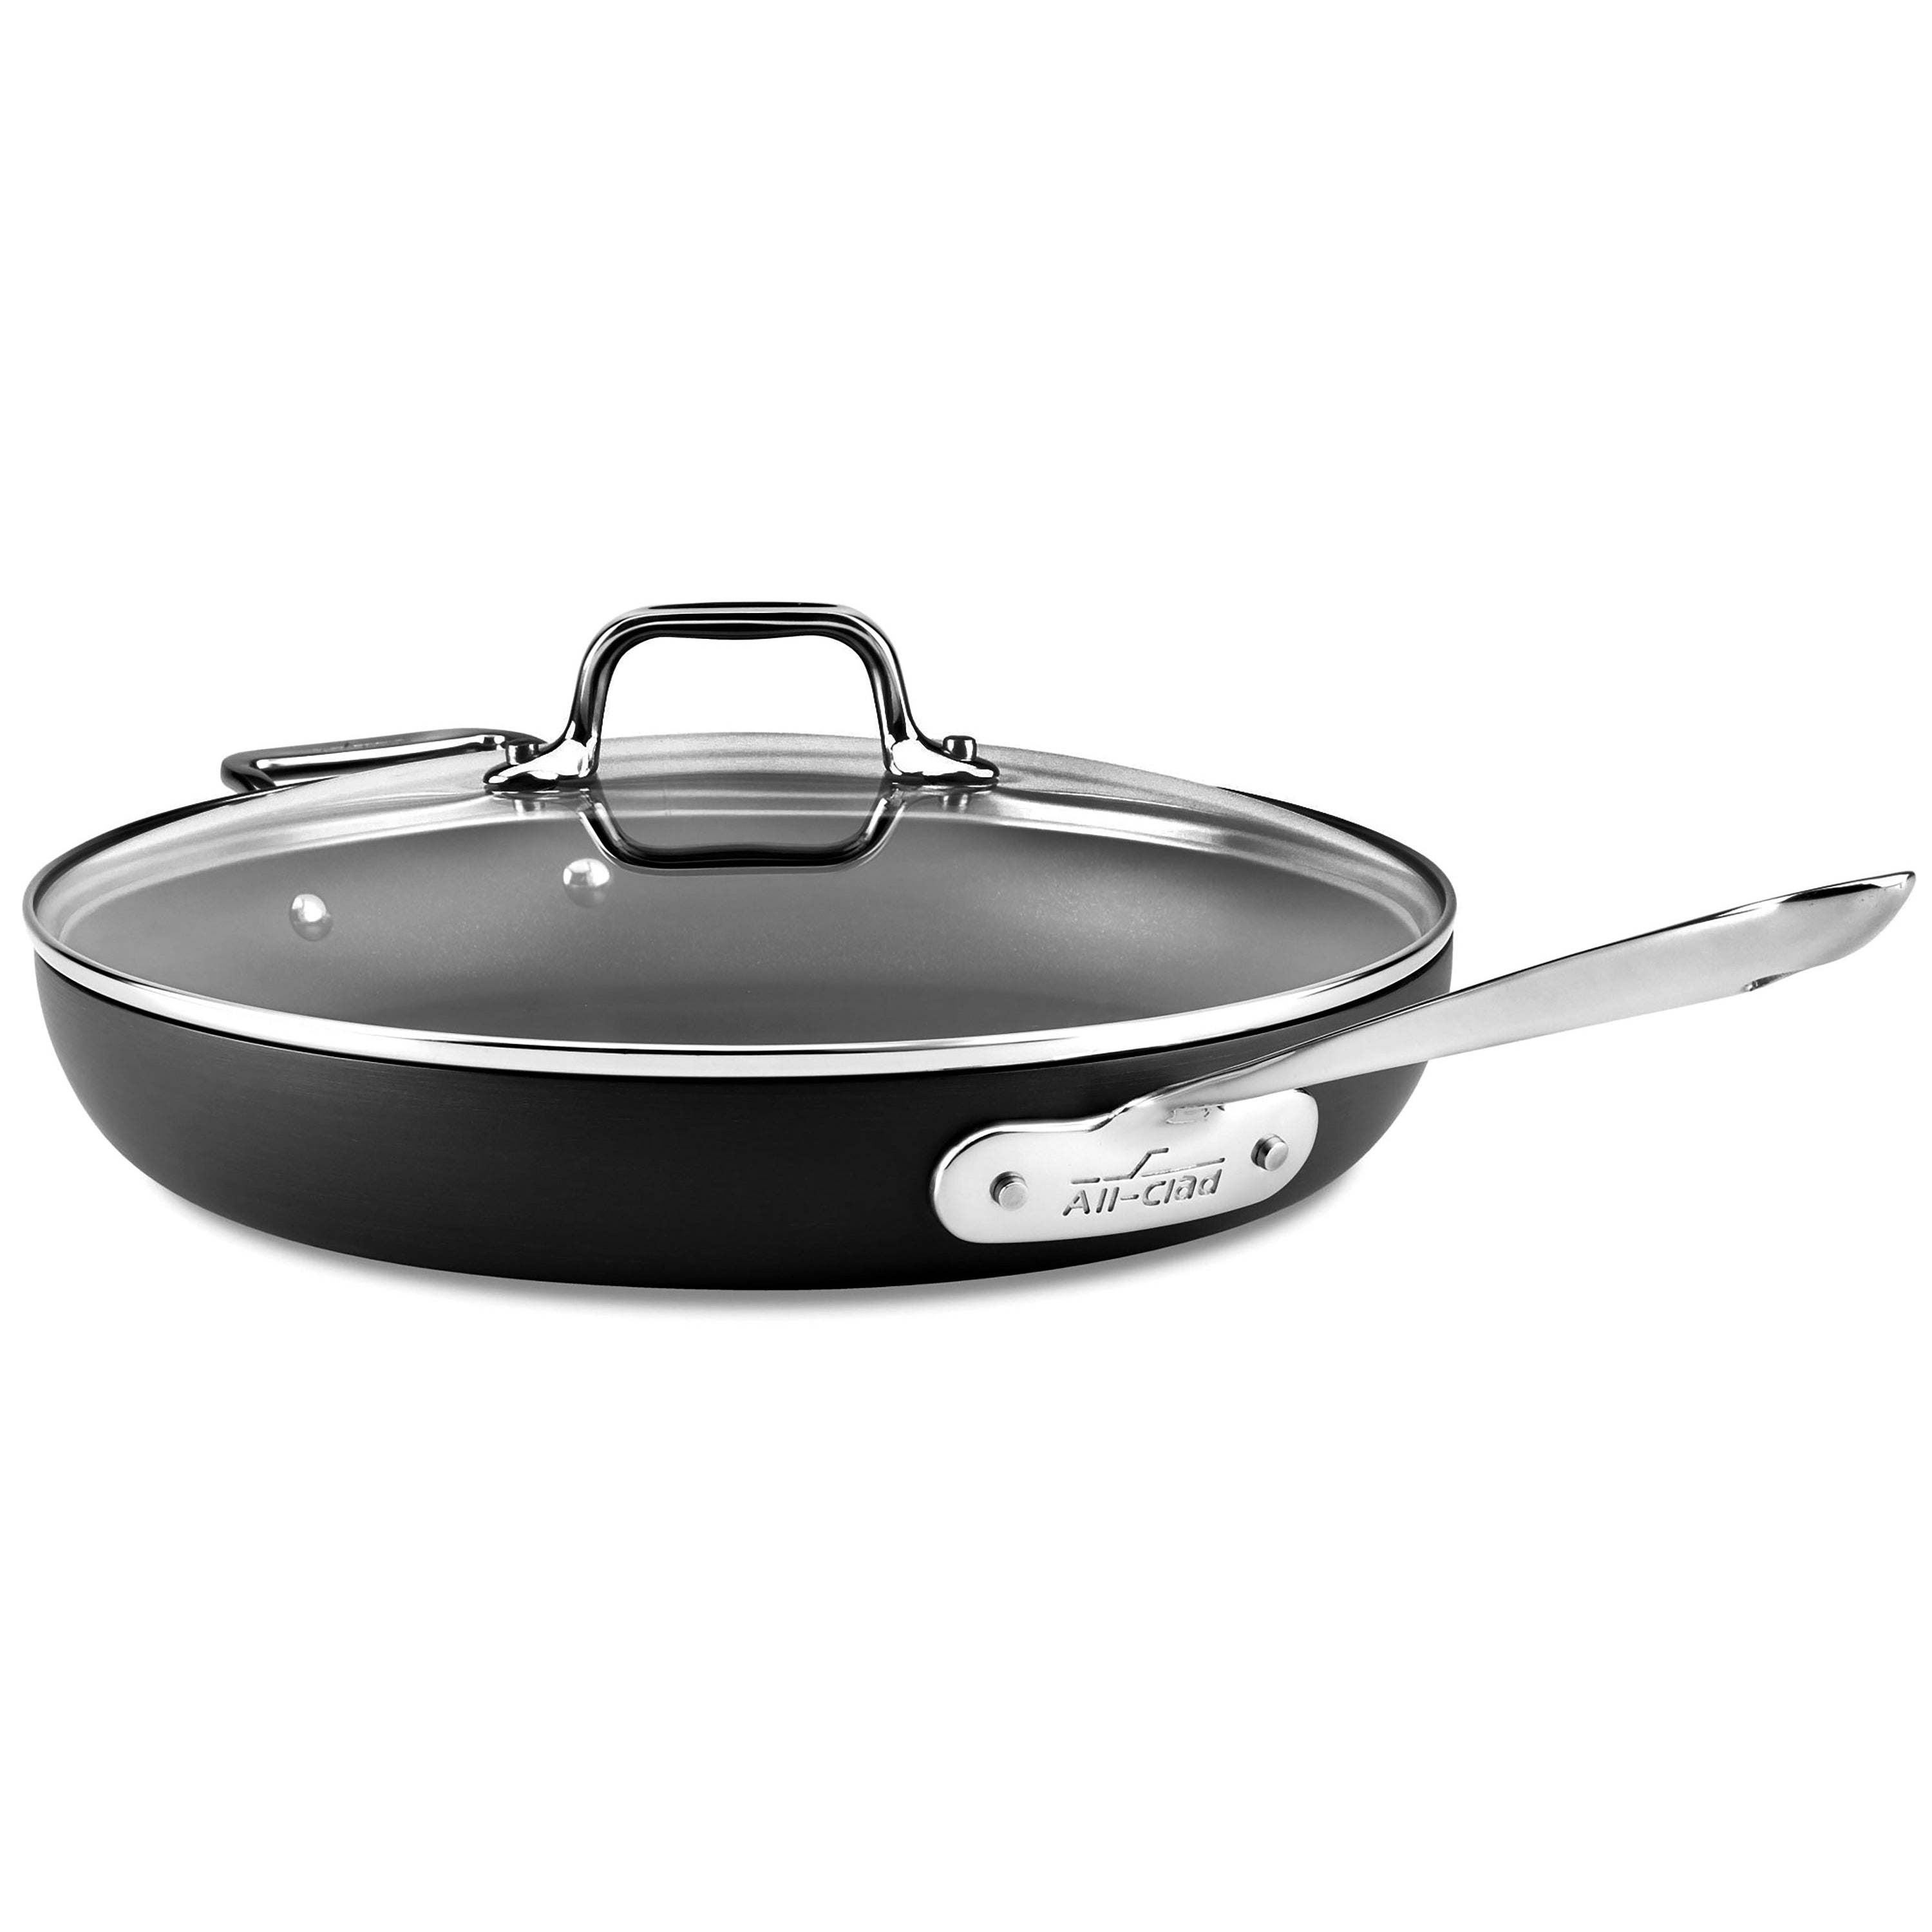 All-Clad HA1 Hard Anodized Nonstick 2 Piece Fry Pan Set 8, 10 Inch Induction  Pots and Pans, Cookware Black